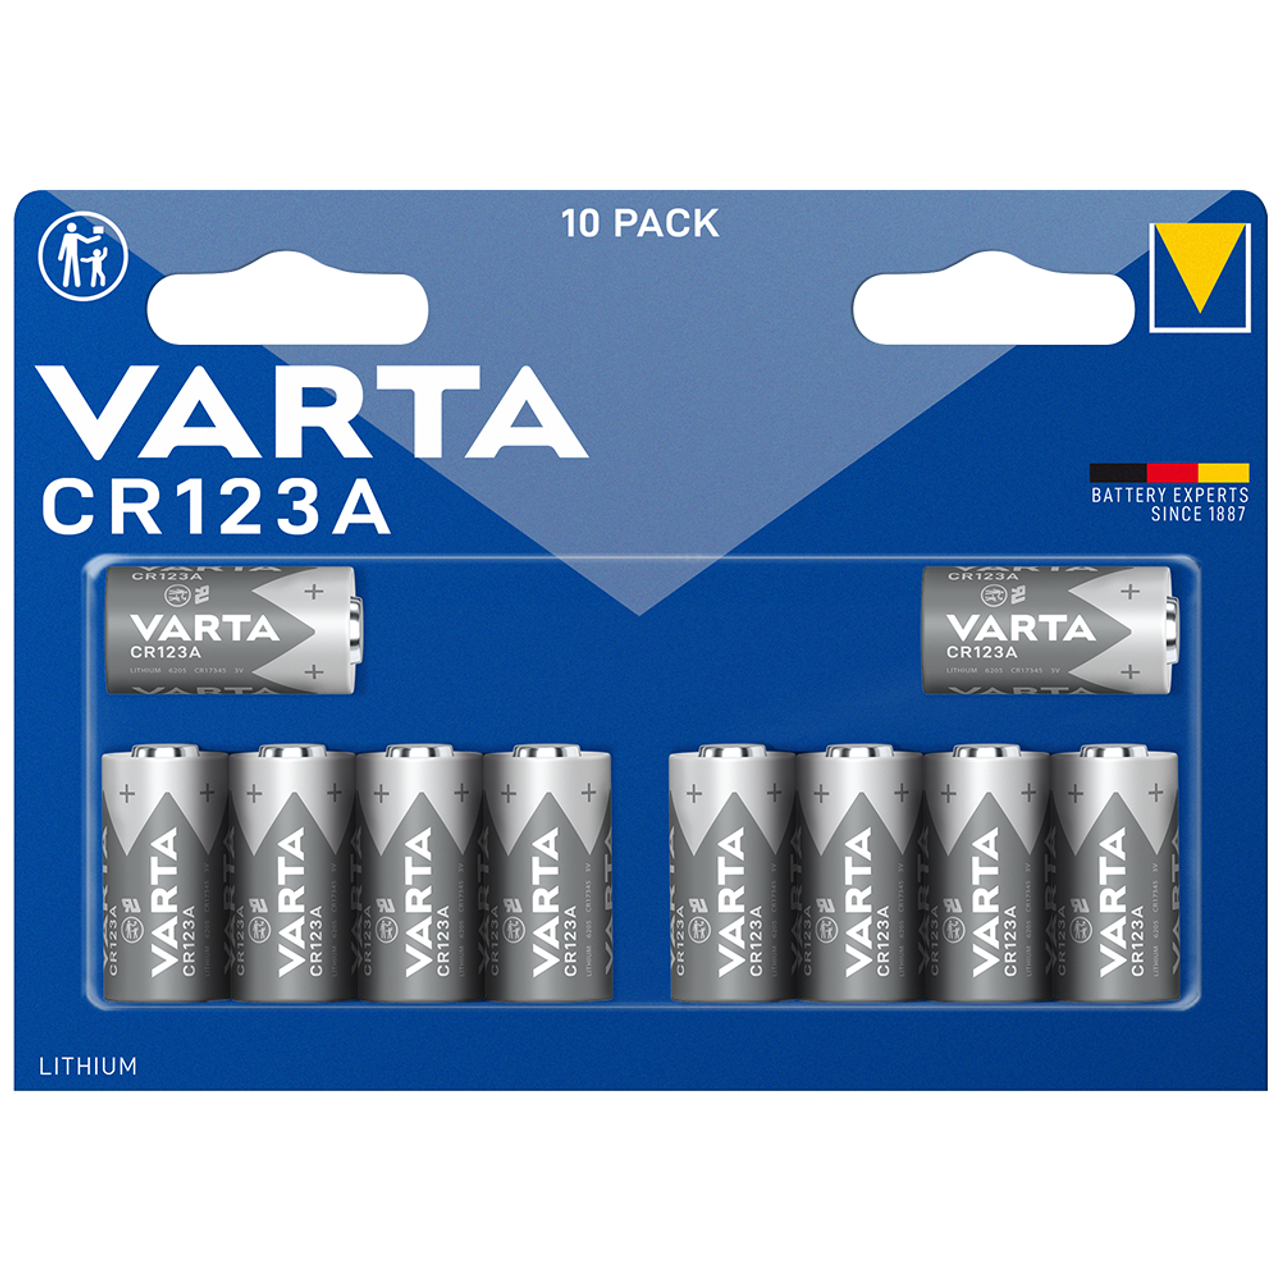 Panasonic CR123A Lithium Batteries in Bulk Boxes of 100